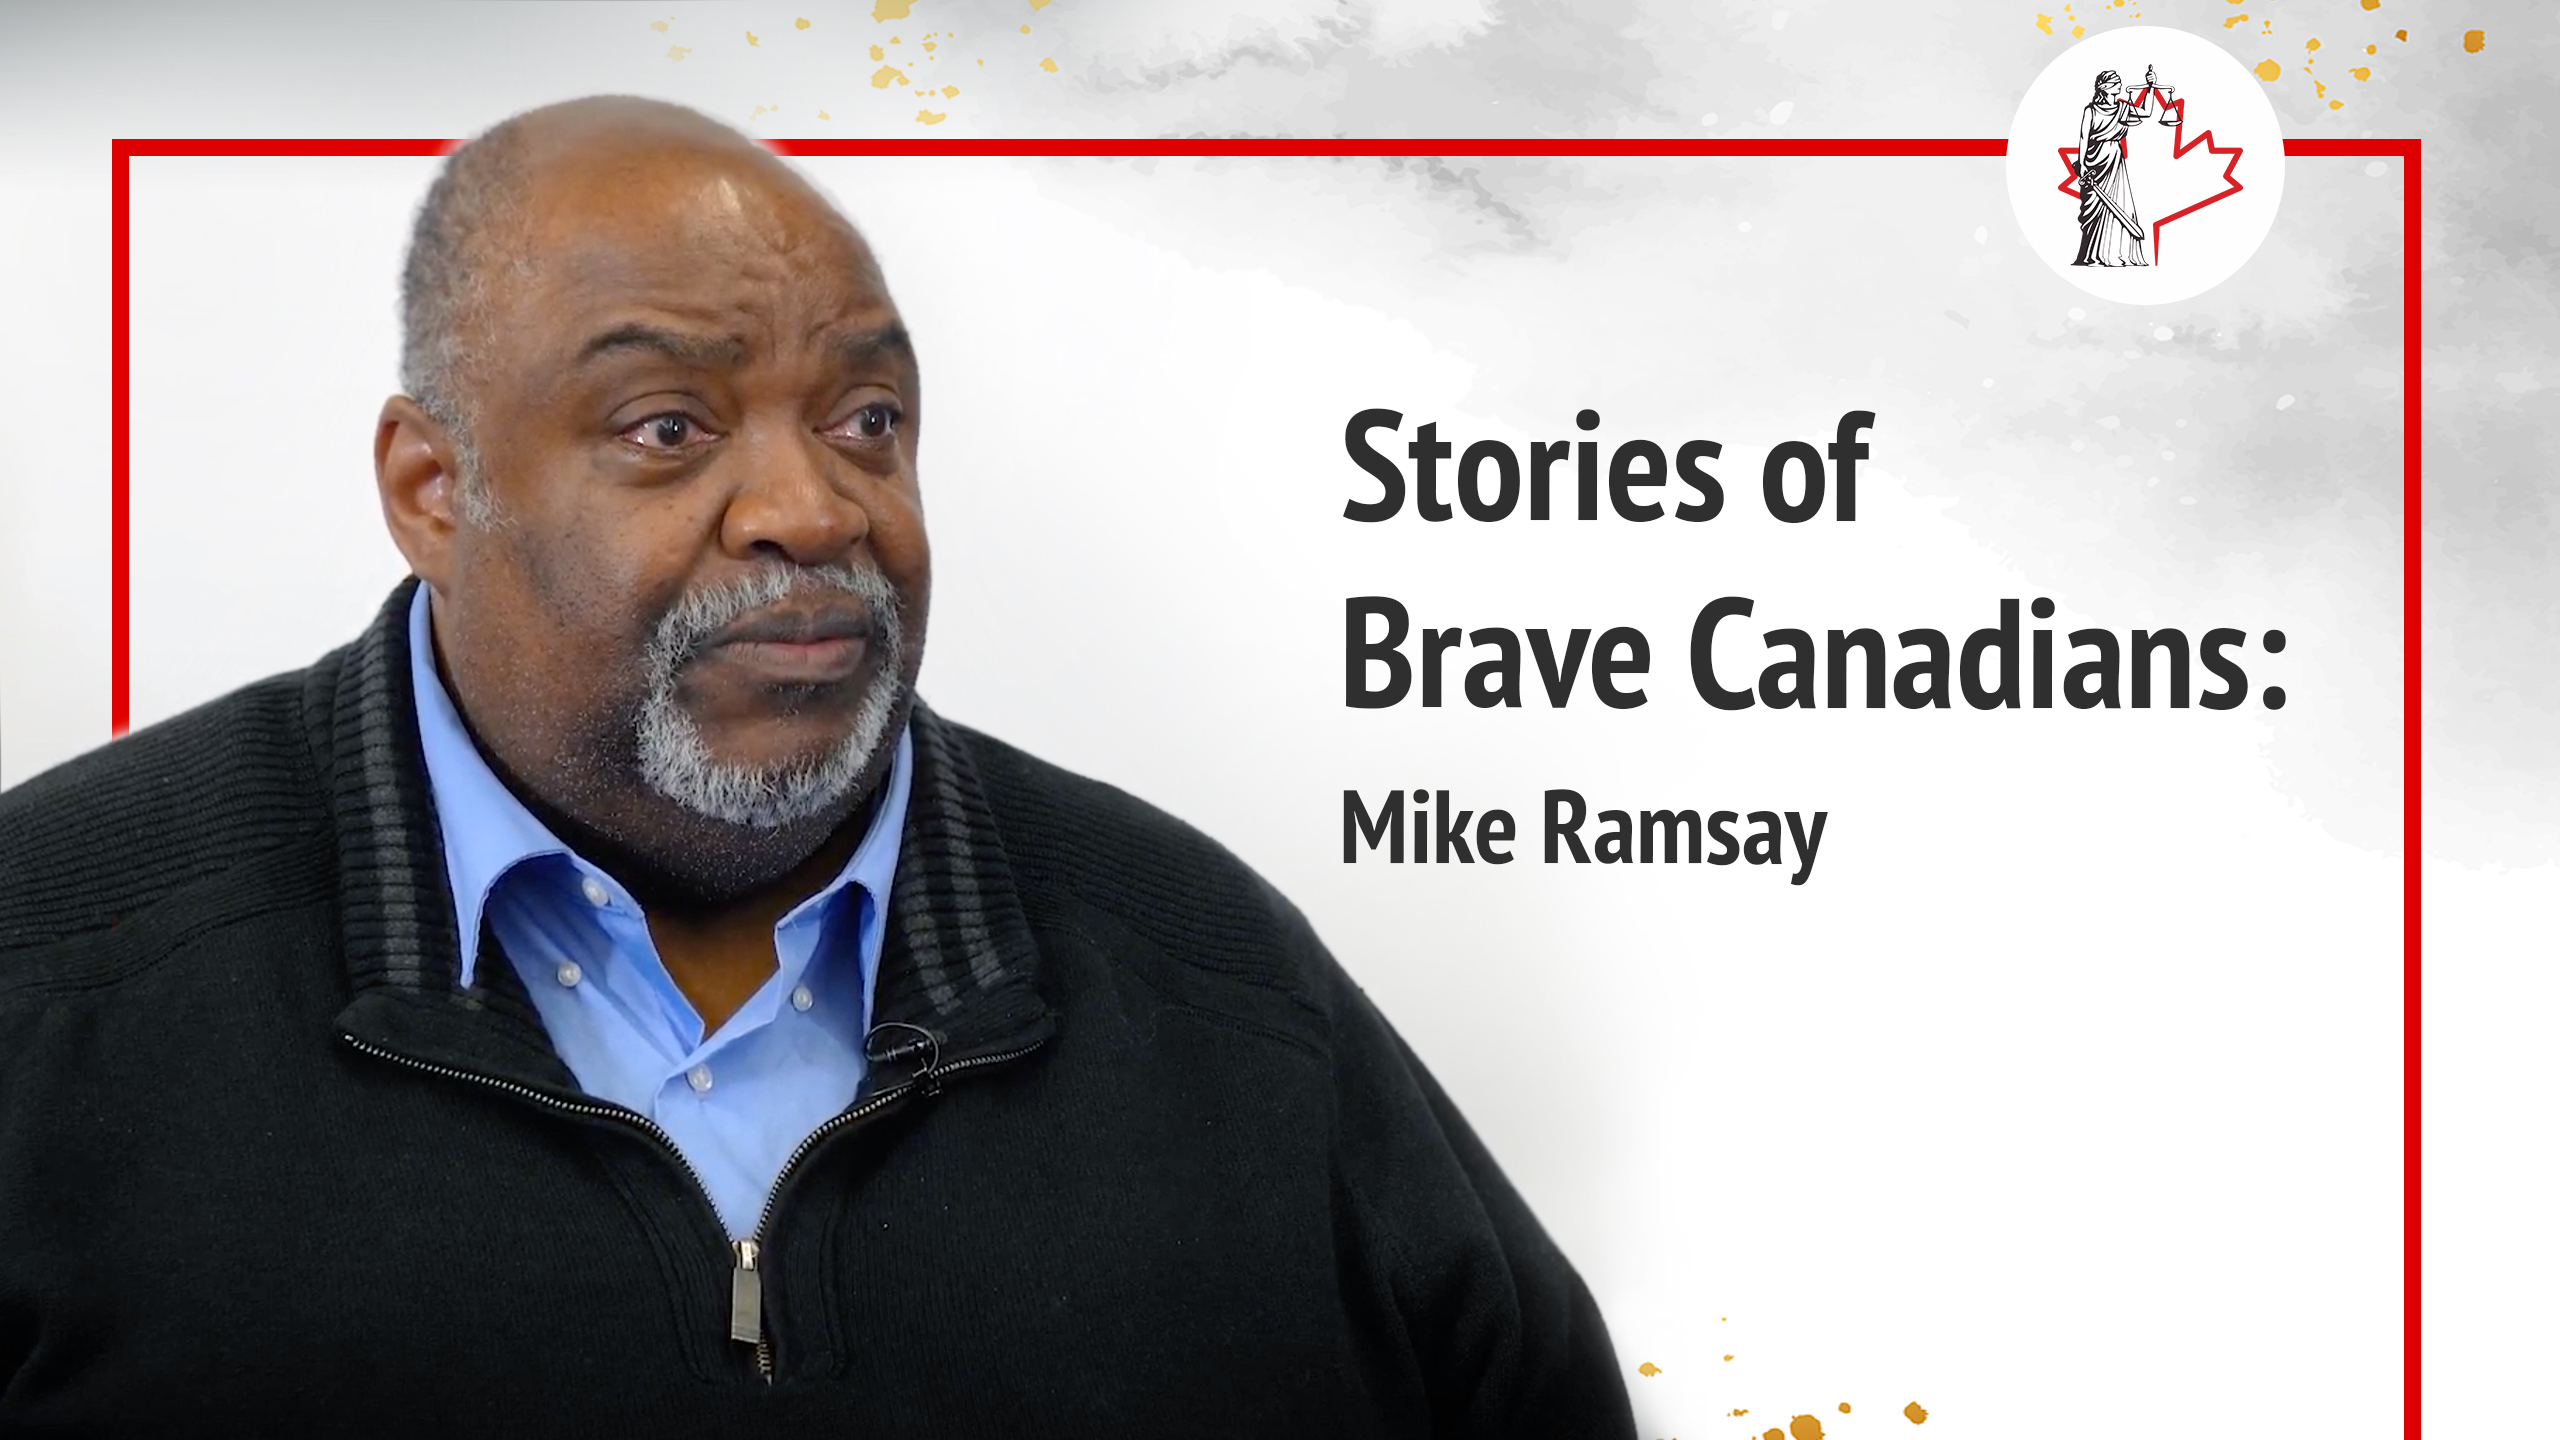 WATCH: Trustee Mike Ramsay defended a censored teacher & was censored himself | Stories of Brave Canadians